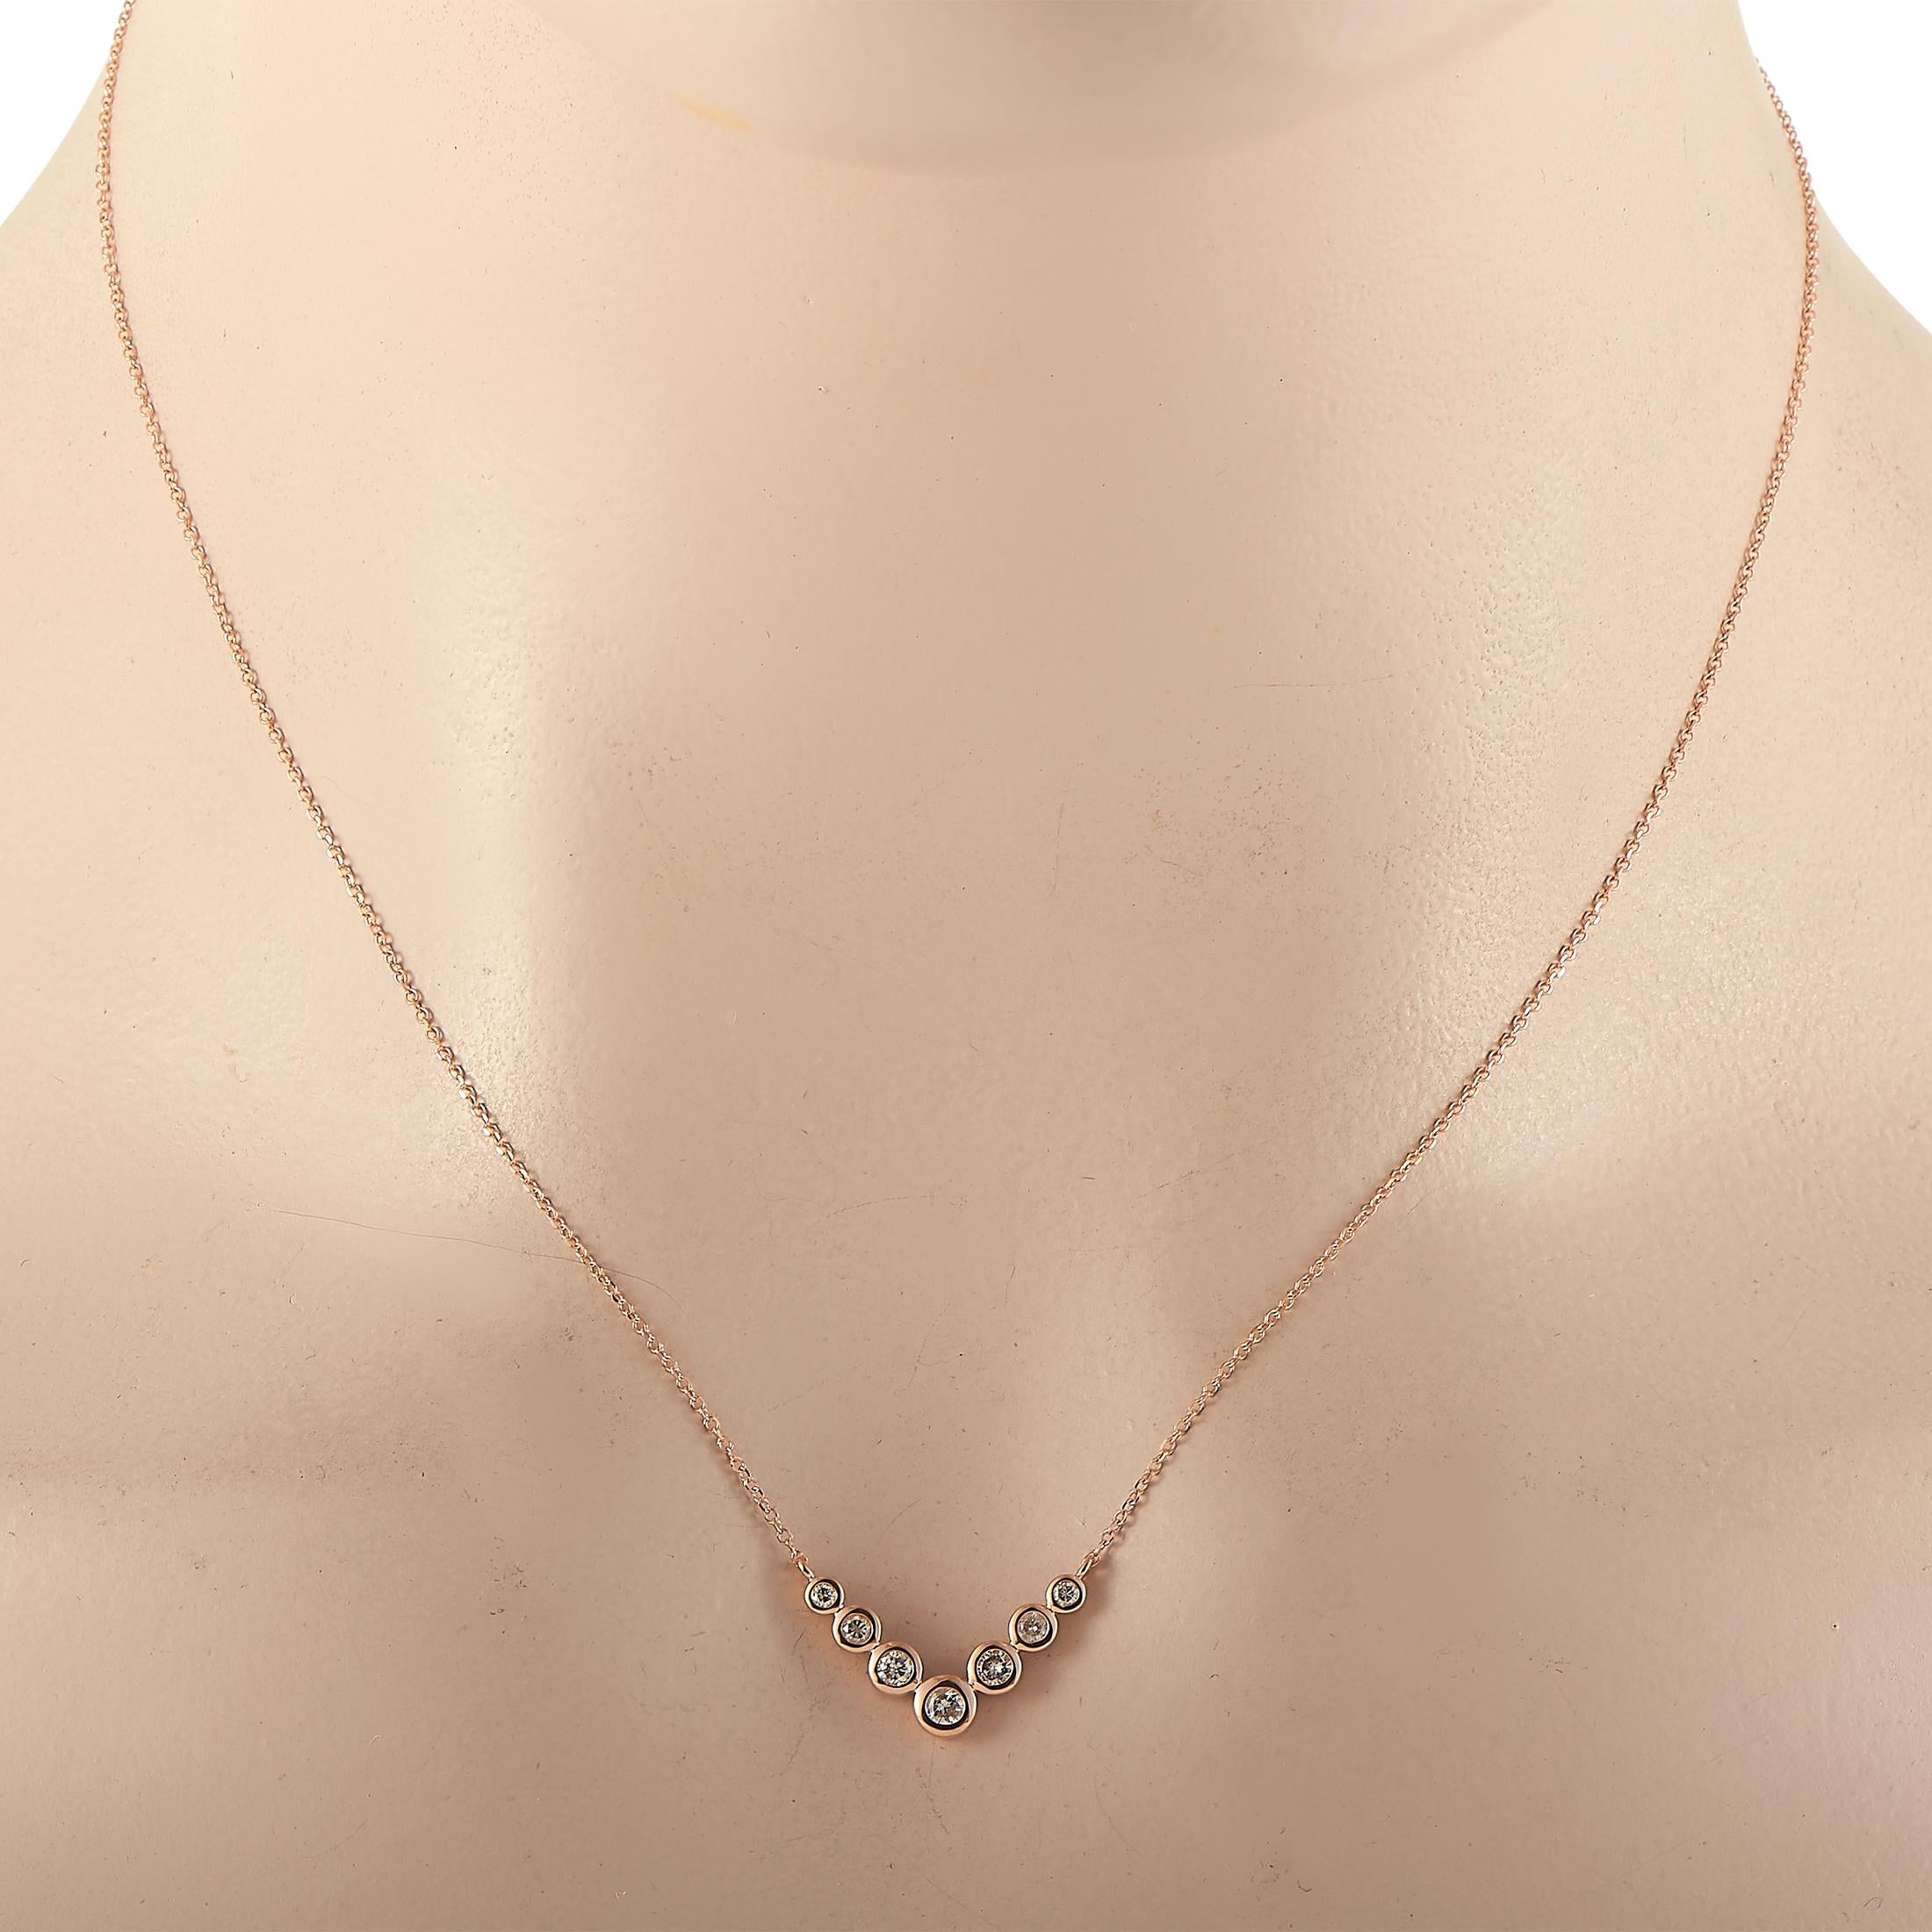 This LB Exclusive necklace is crafted from 14K rose gold and weighs 2 grams. It is presented with a 16” chain and boasts a pendant that measures 0.50” in length and 0.75” in width. The necklace is set with diamonds that total 0.25 carats.
 
 Offered